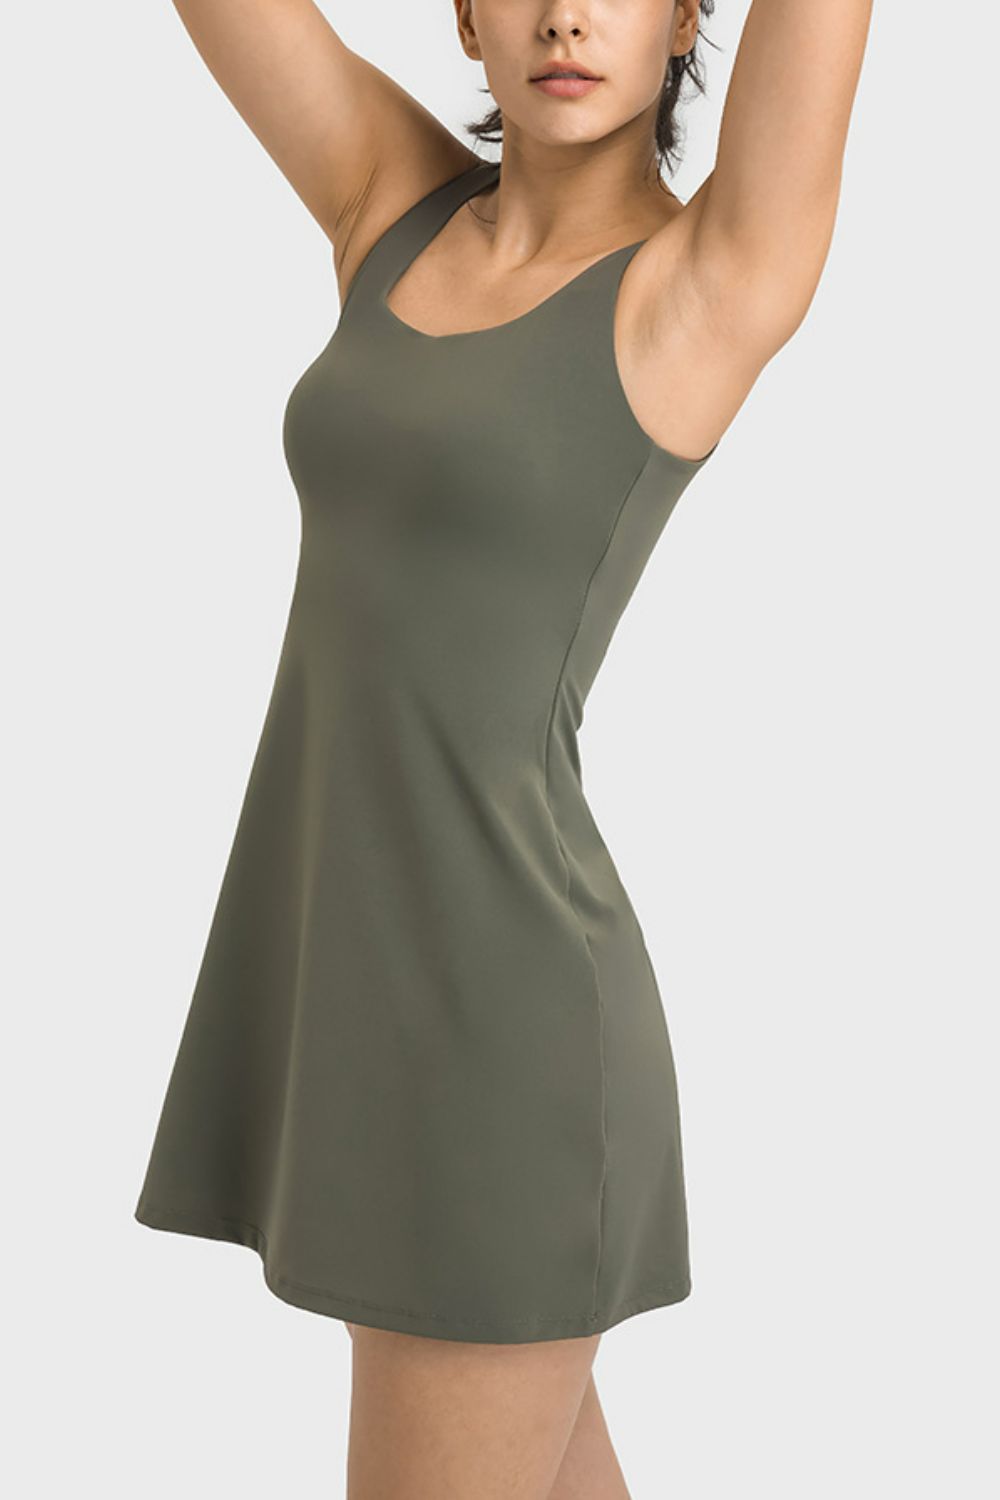 Square Neck Sports Tank Dress with Full Coverage Bottoms - Groove Rabbit